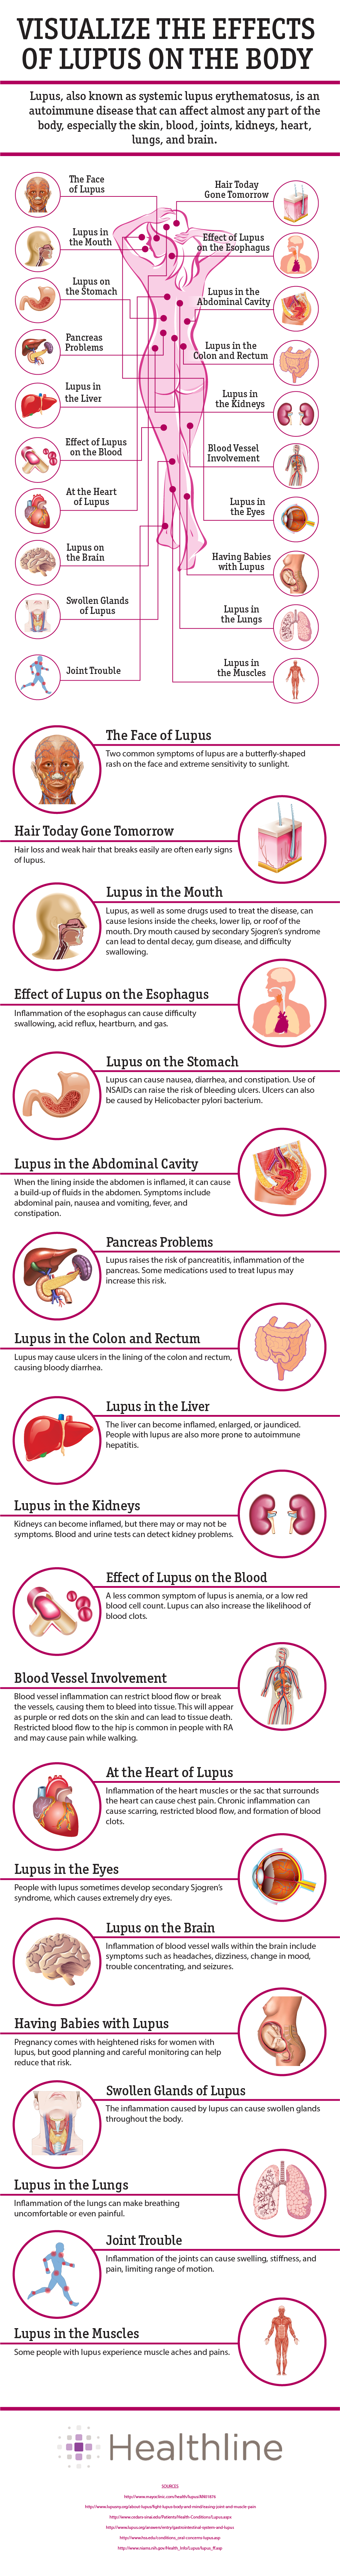 Effects of Lupus